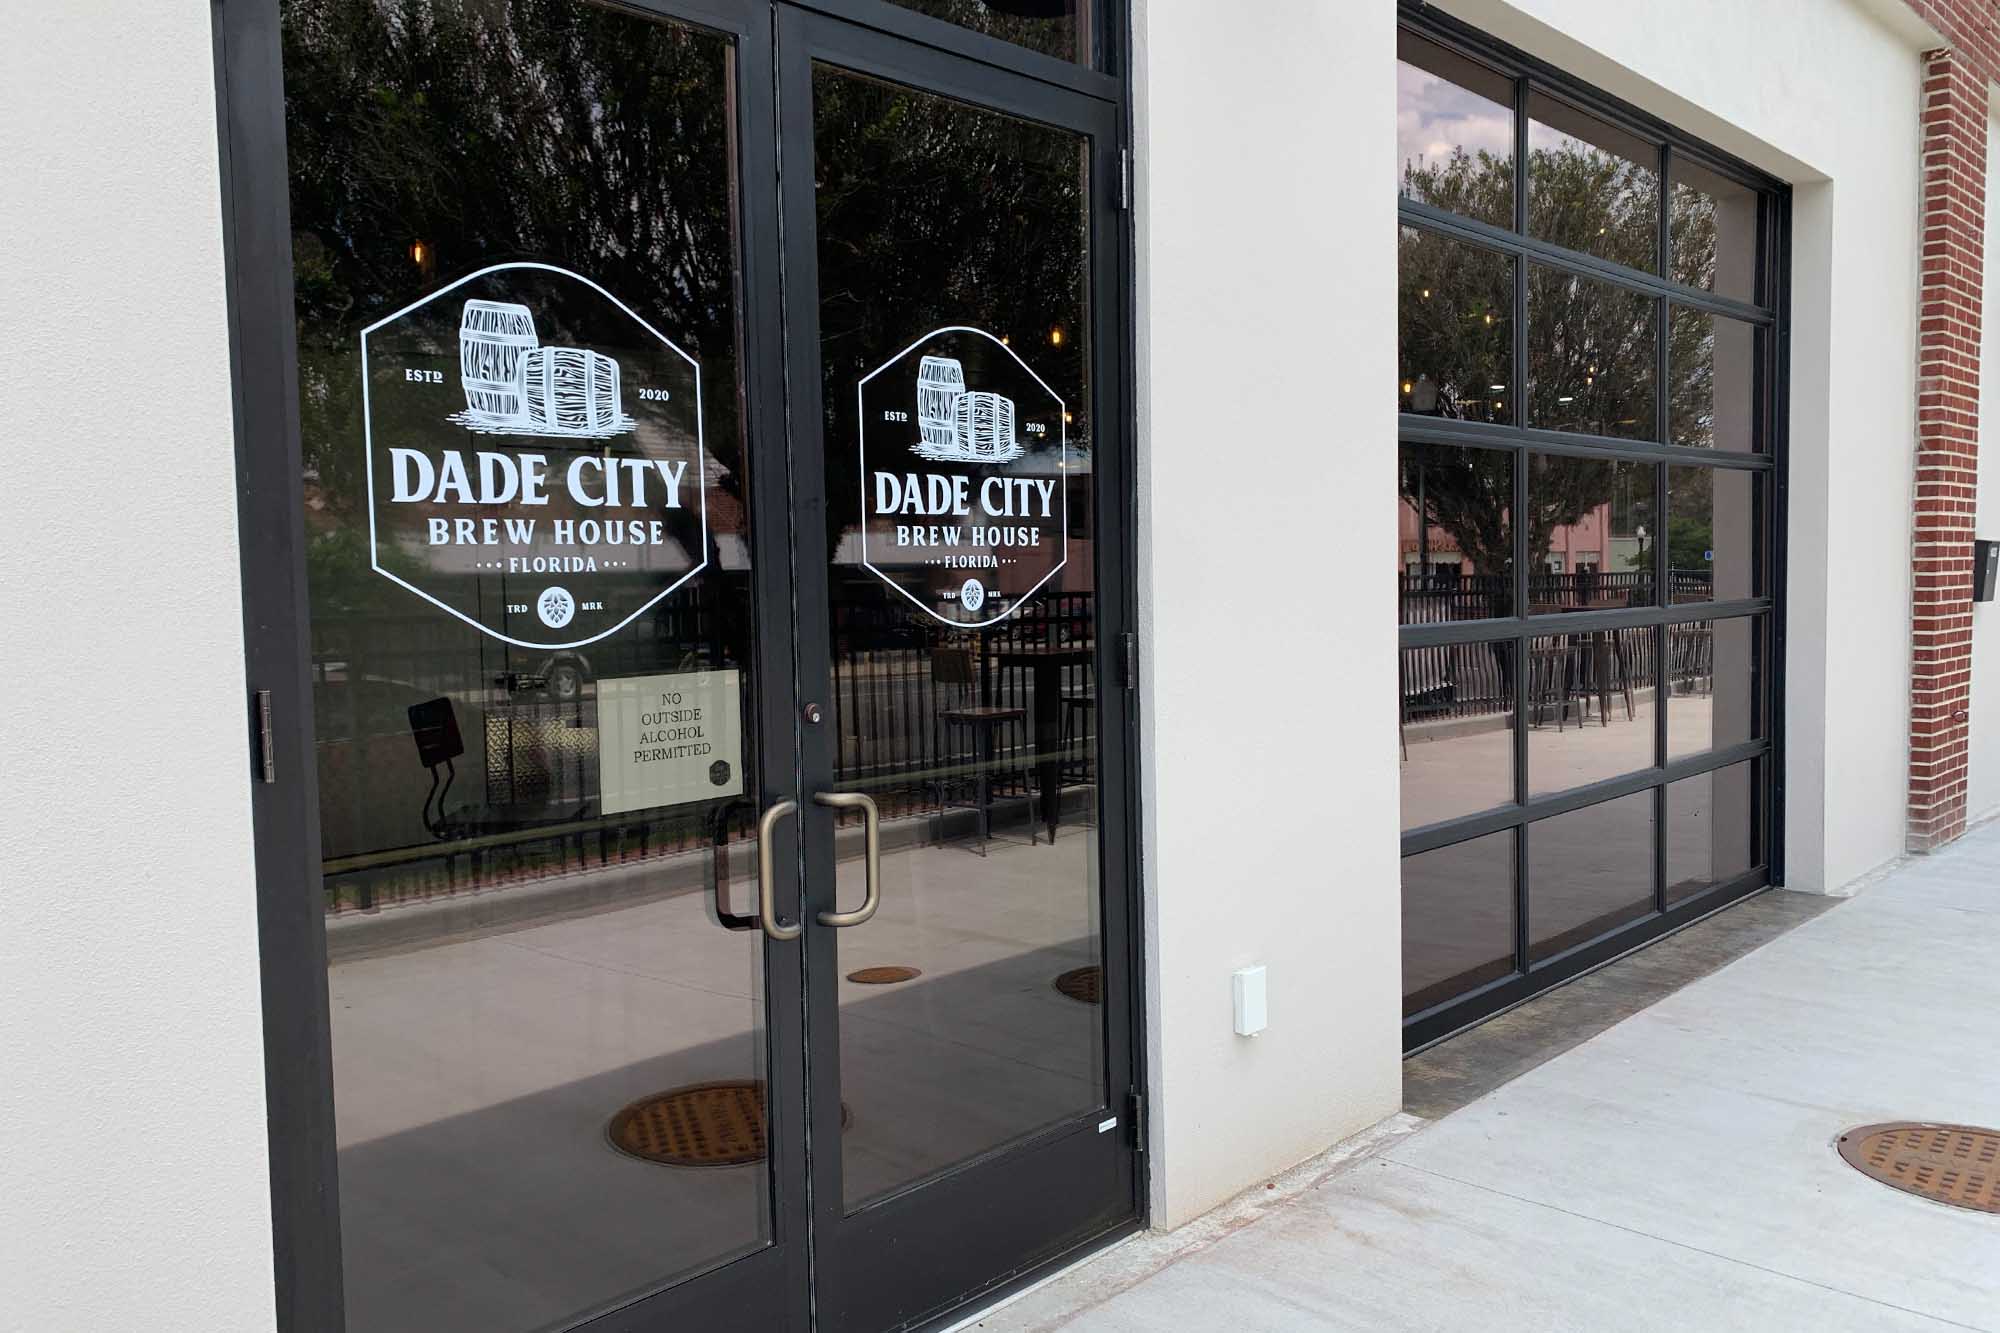 Image of Dade City Brew House storefront